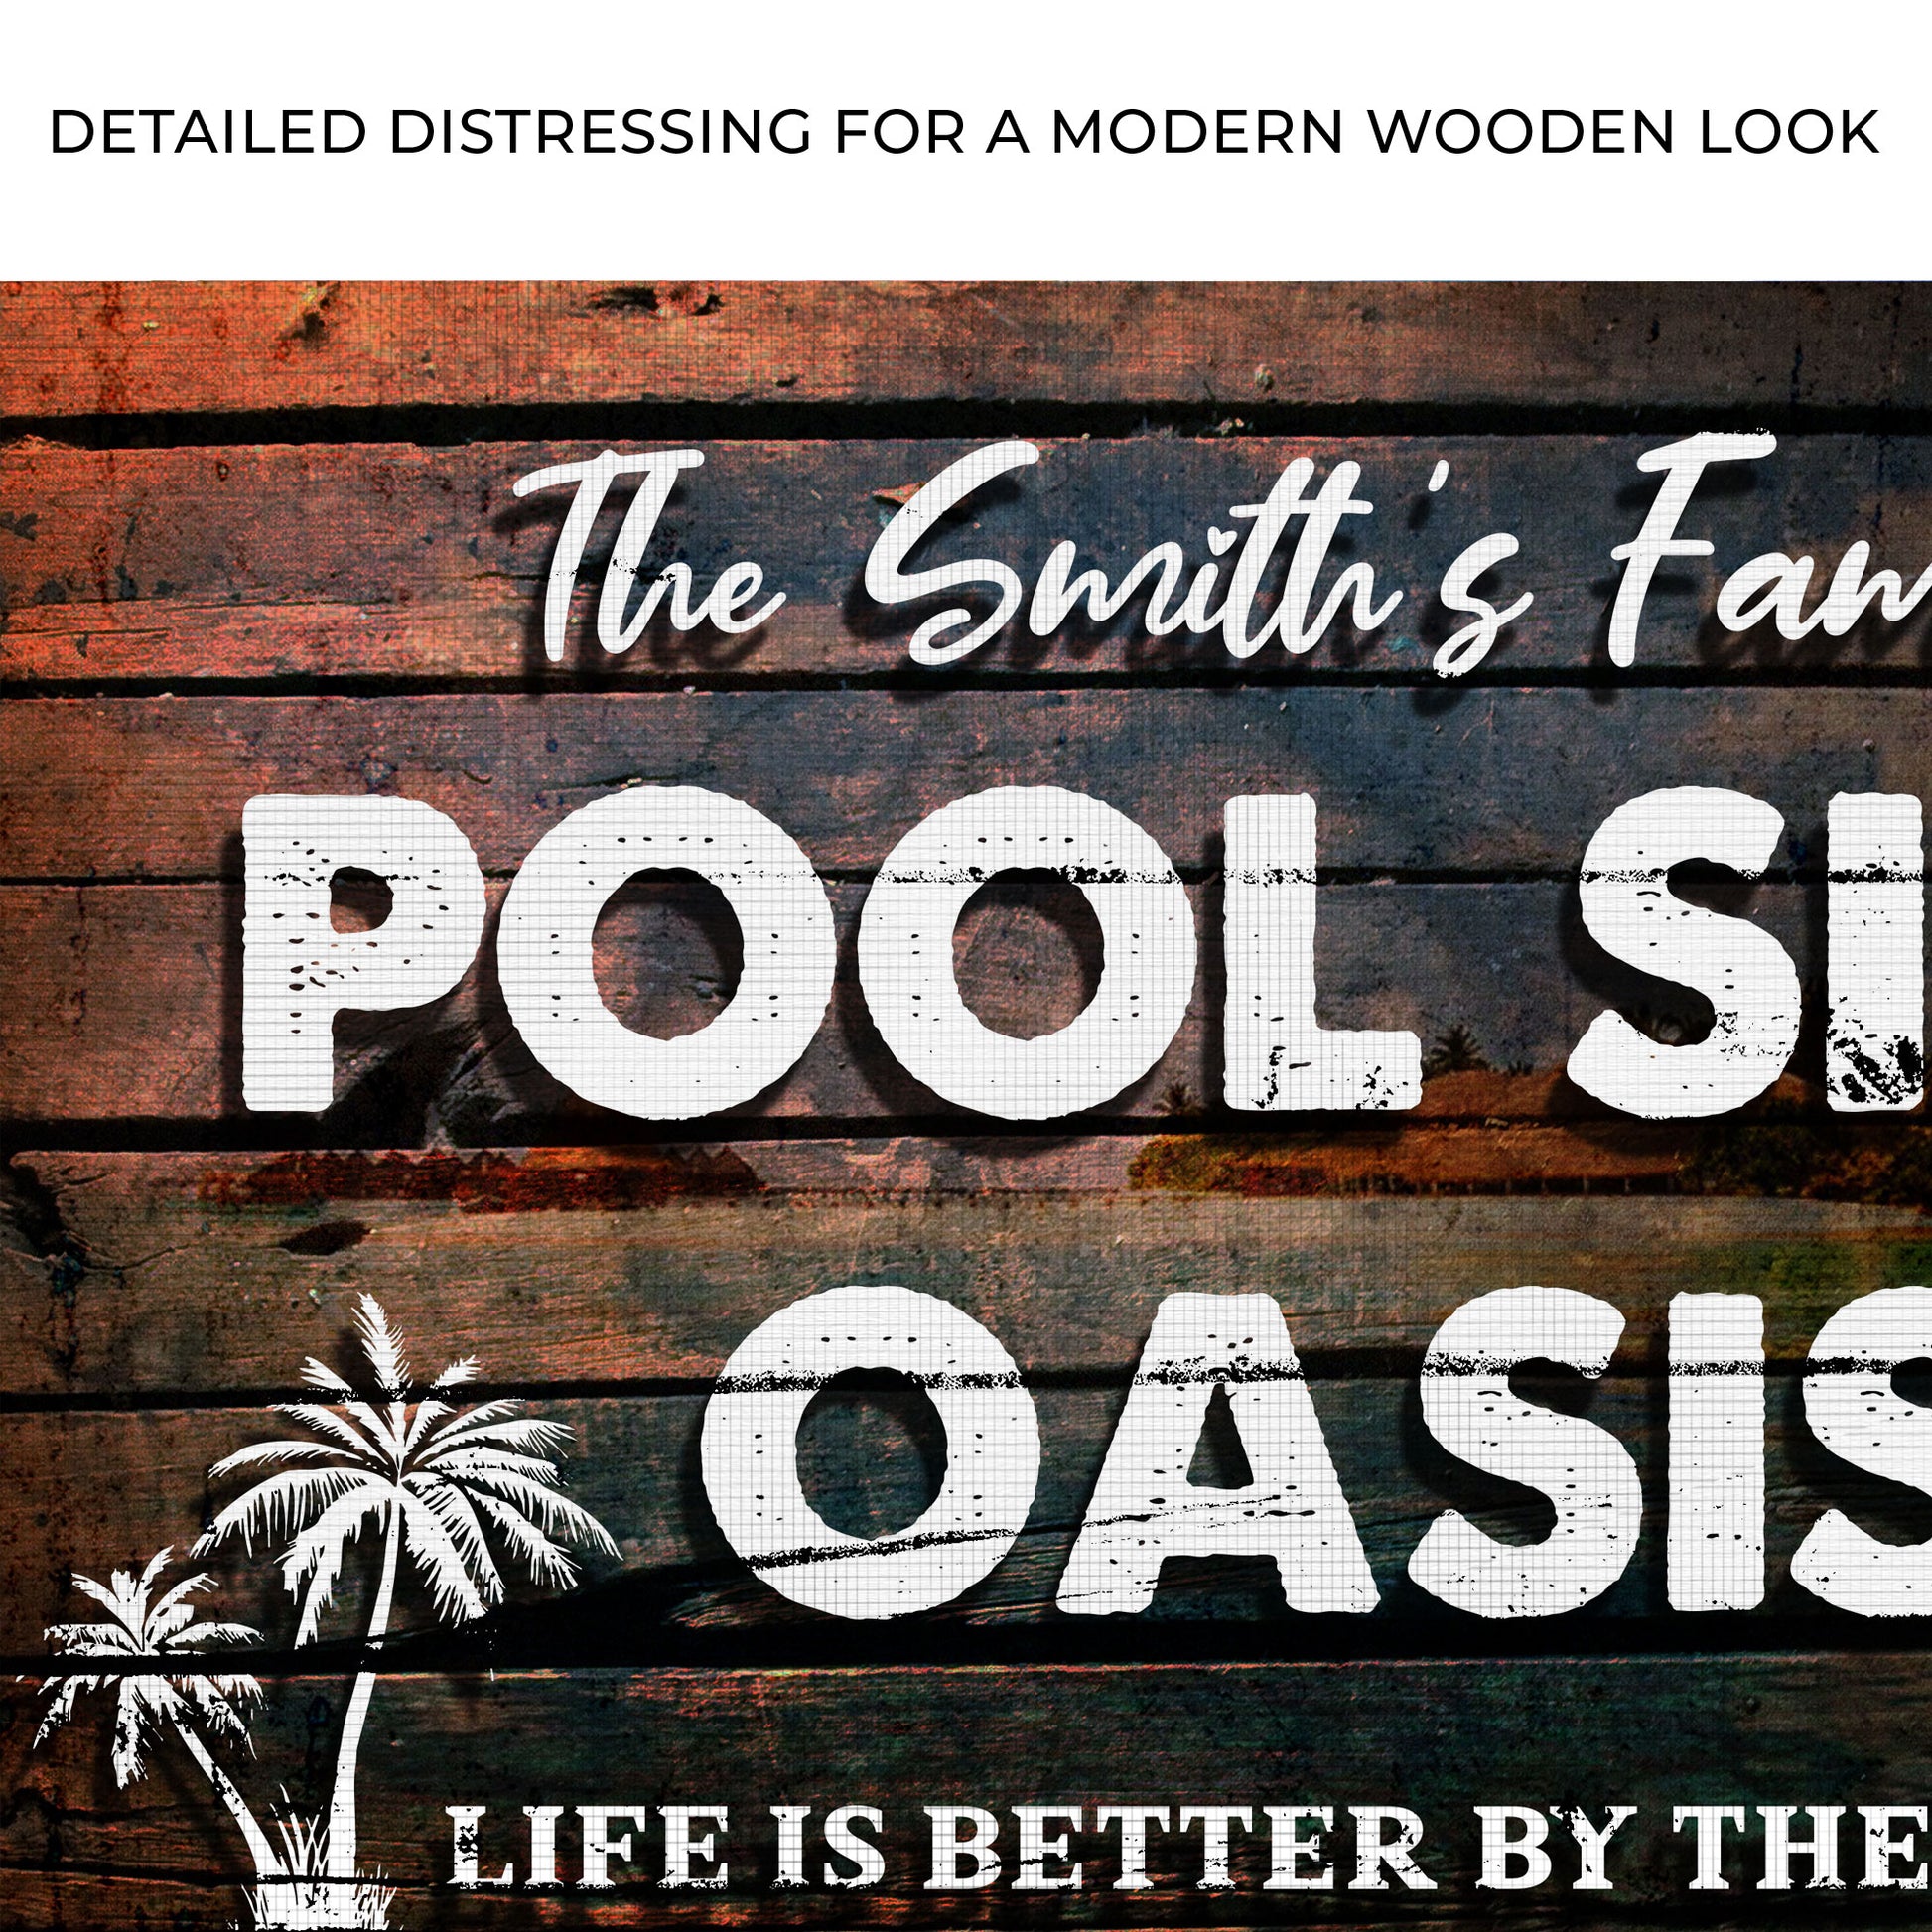 Poolside Oasis Sign Zoom - Image by Tailored Canvases